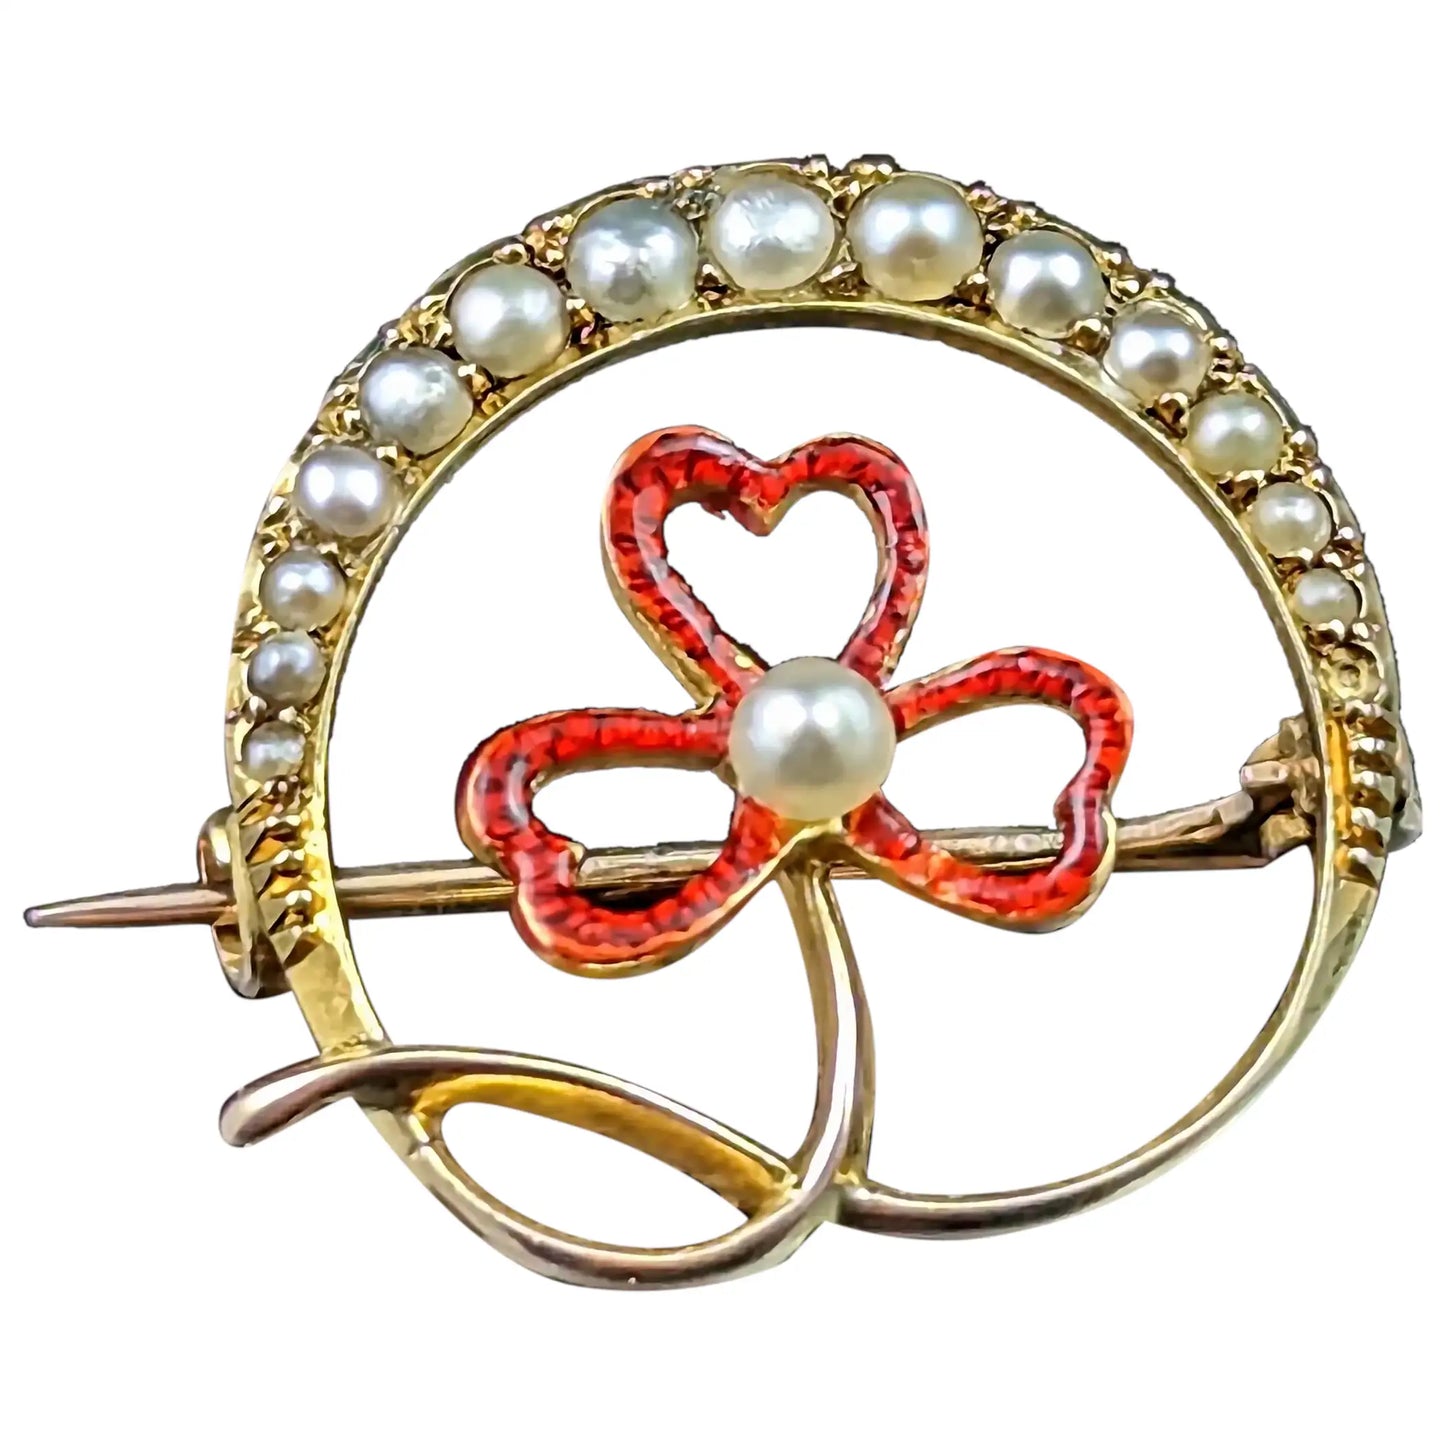 Antique Crescent and Shamrock brooch, Pearl and Red enamel, 15ct gold